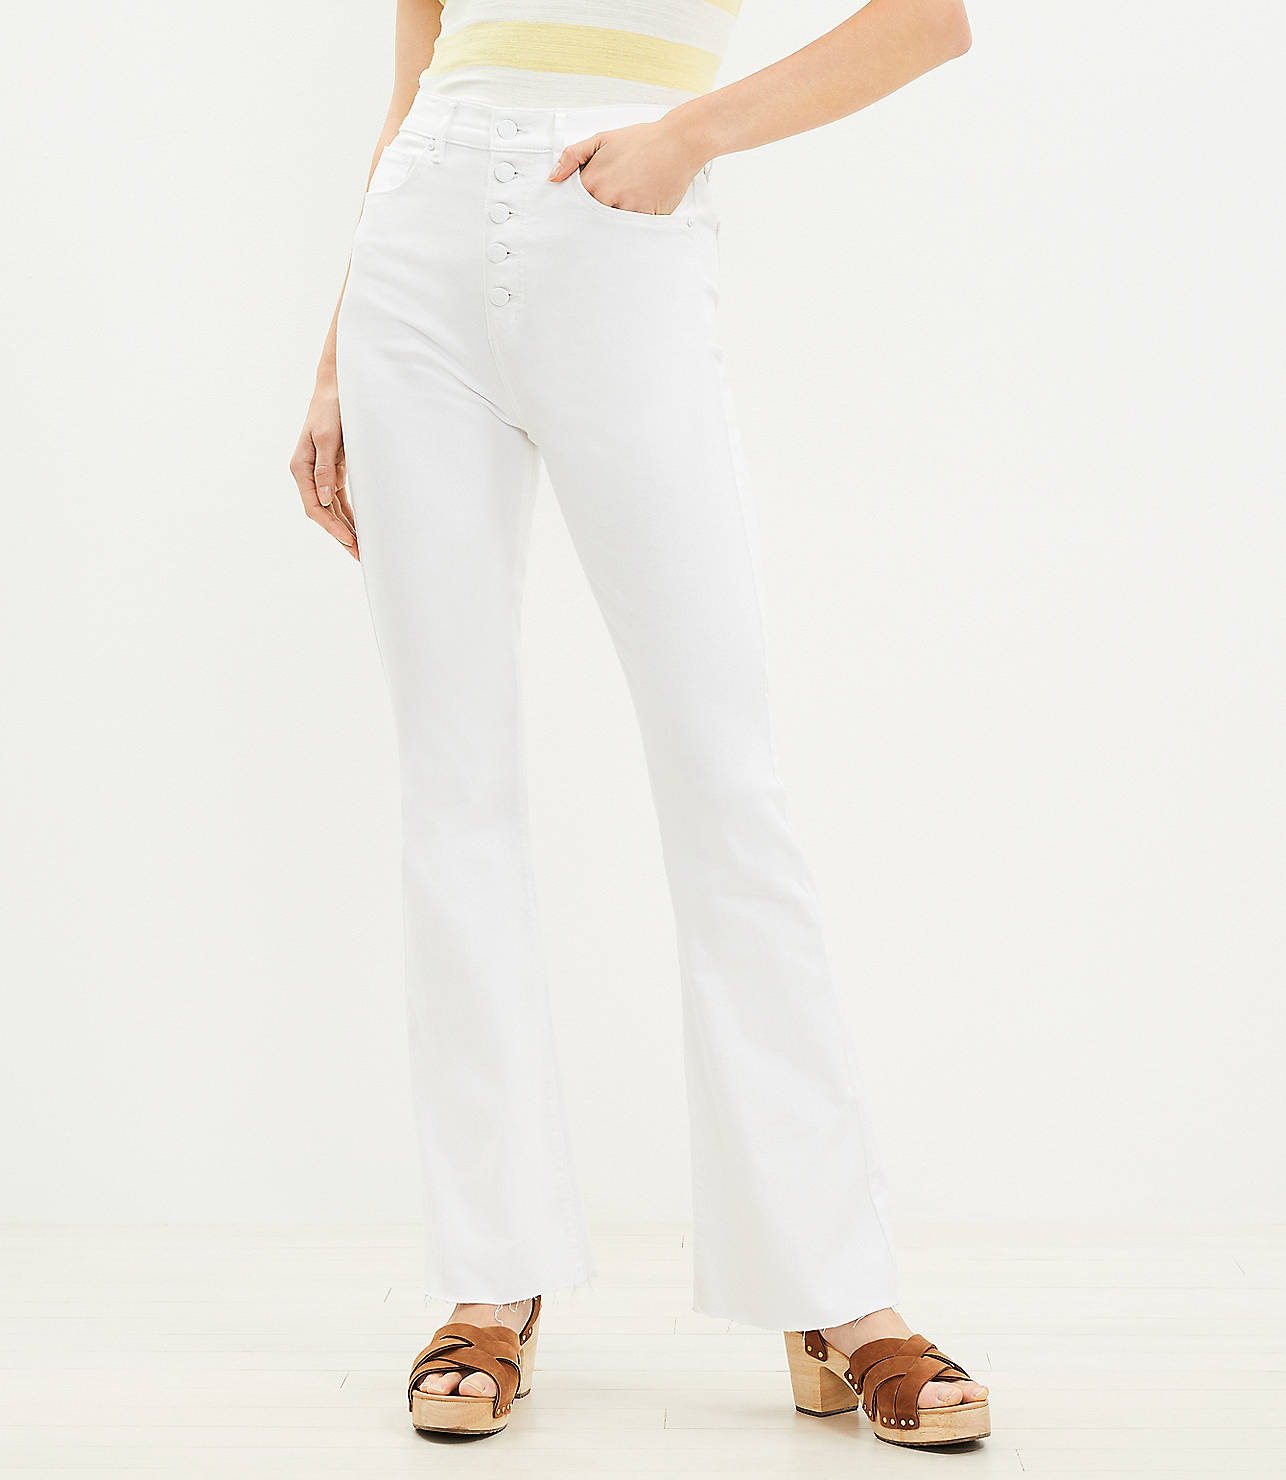 Petite Button Front Fresh Cut High Rise Slim Flare Jeans in White